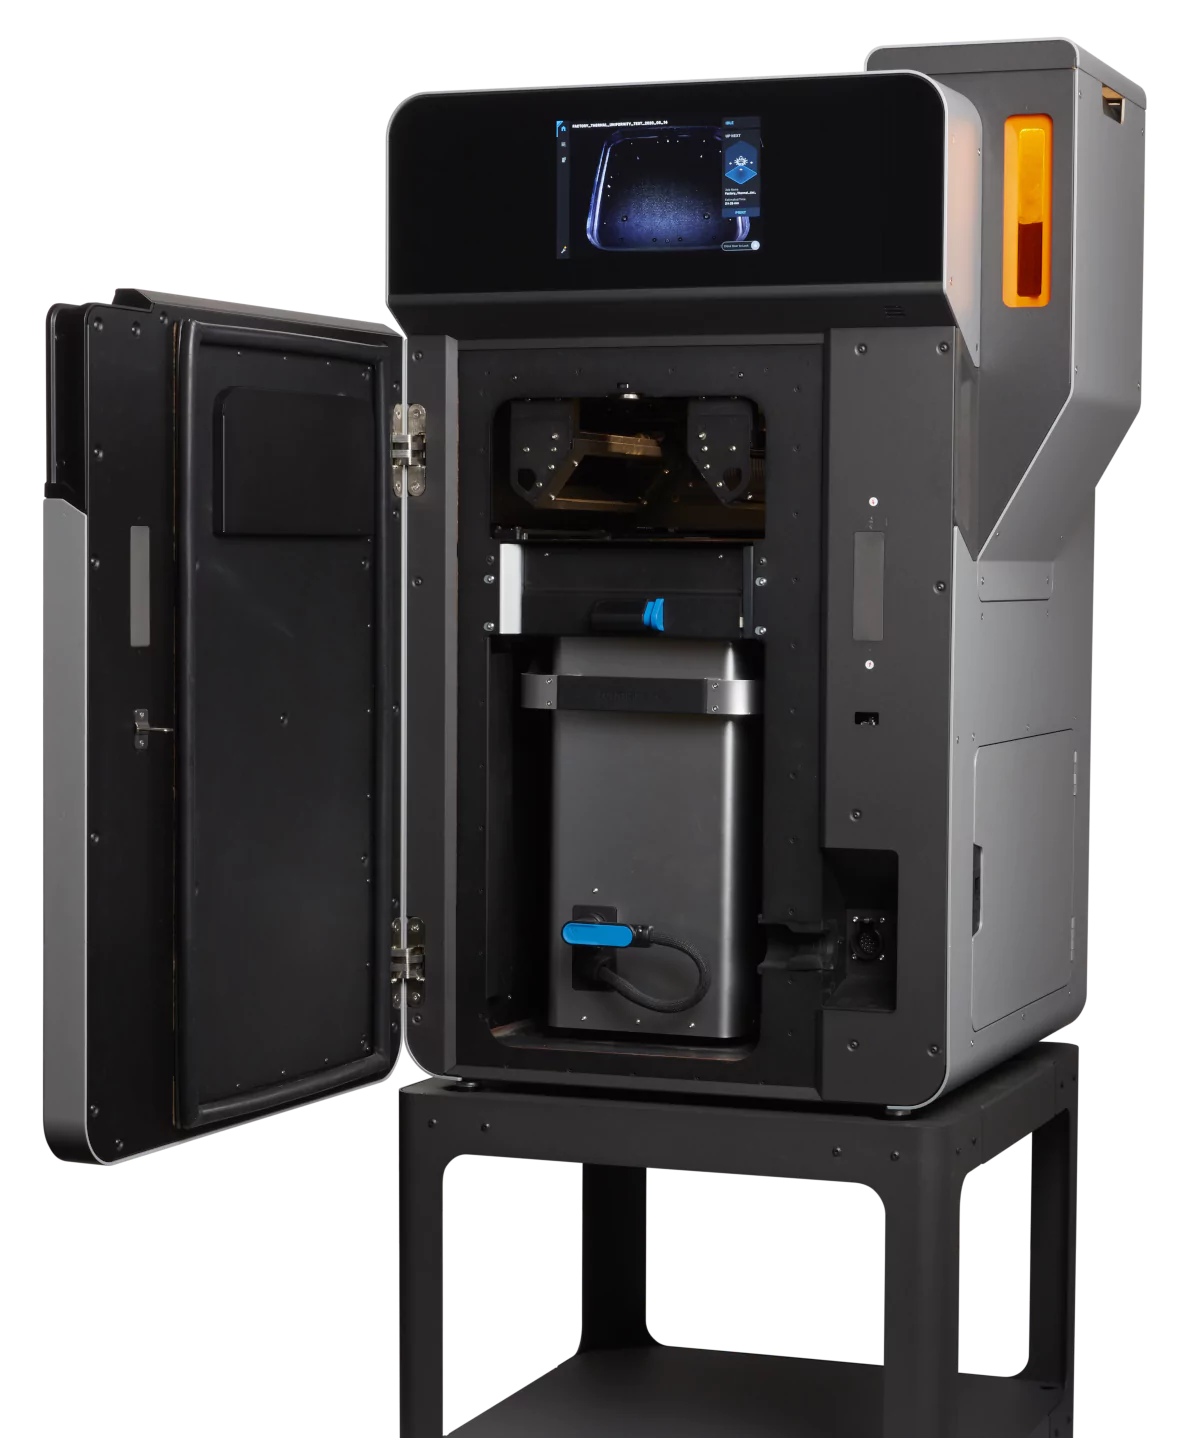 Formlabs Fuse 1 3D Printer technical specifications